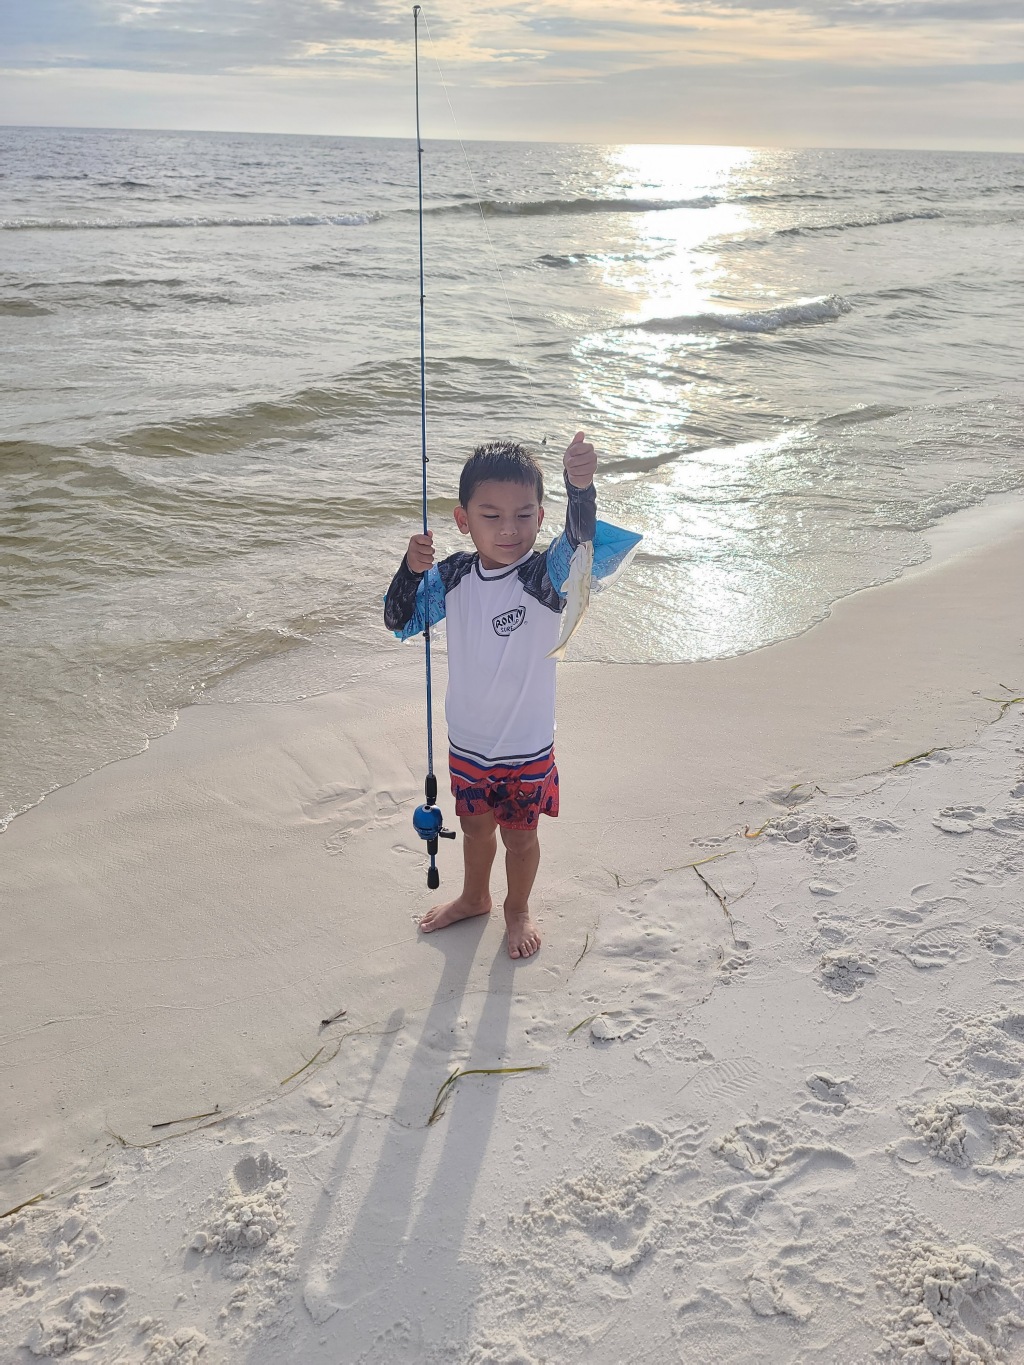 What You’ll Need to Take Your Child Fishing